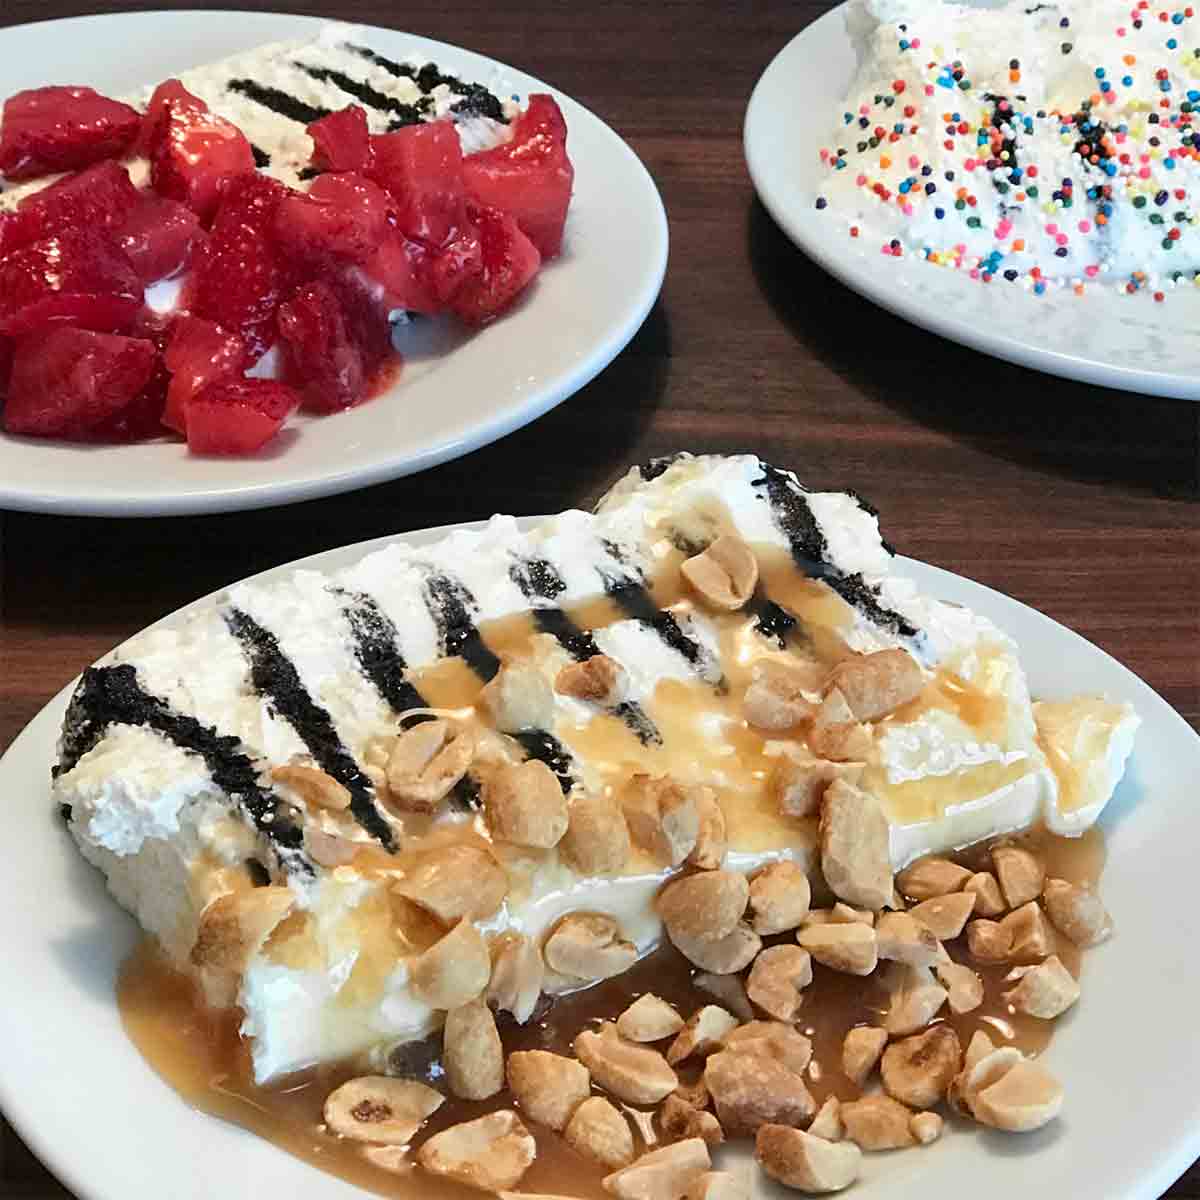 A slice of icebox cake on white plate, topped with peanuts and caramels sauce and another slice topped with strawberries.